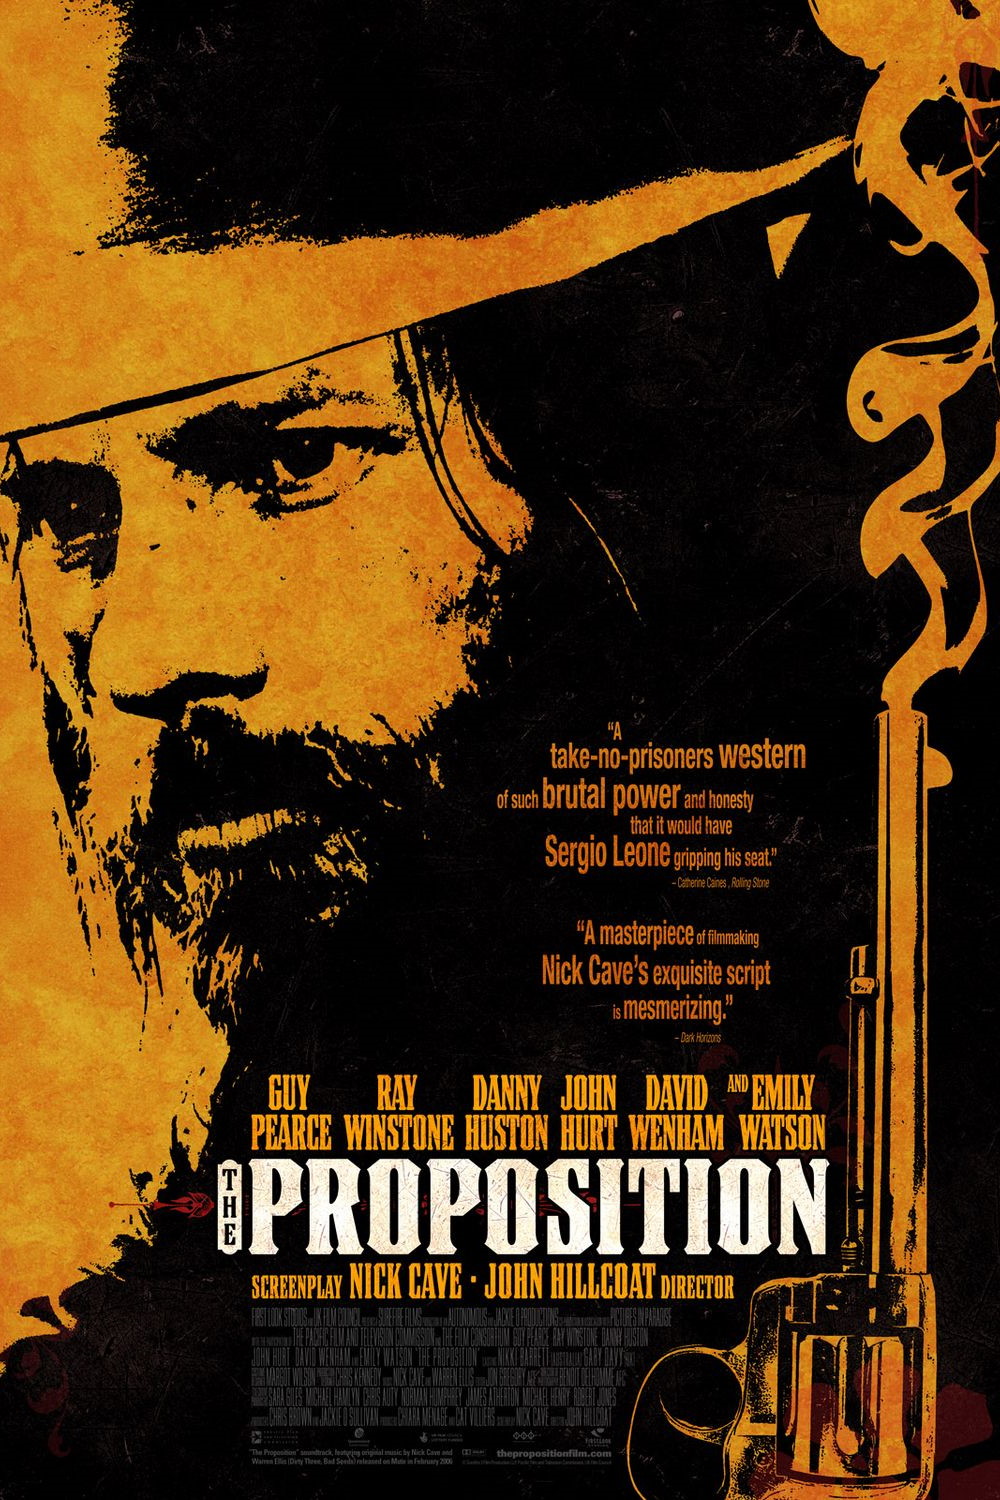 The Proposition (2005) Poster